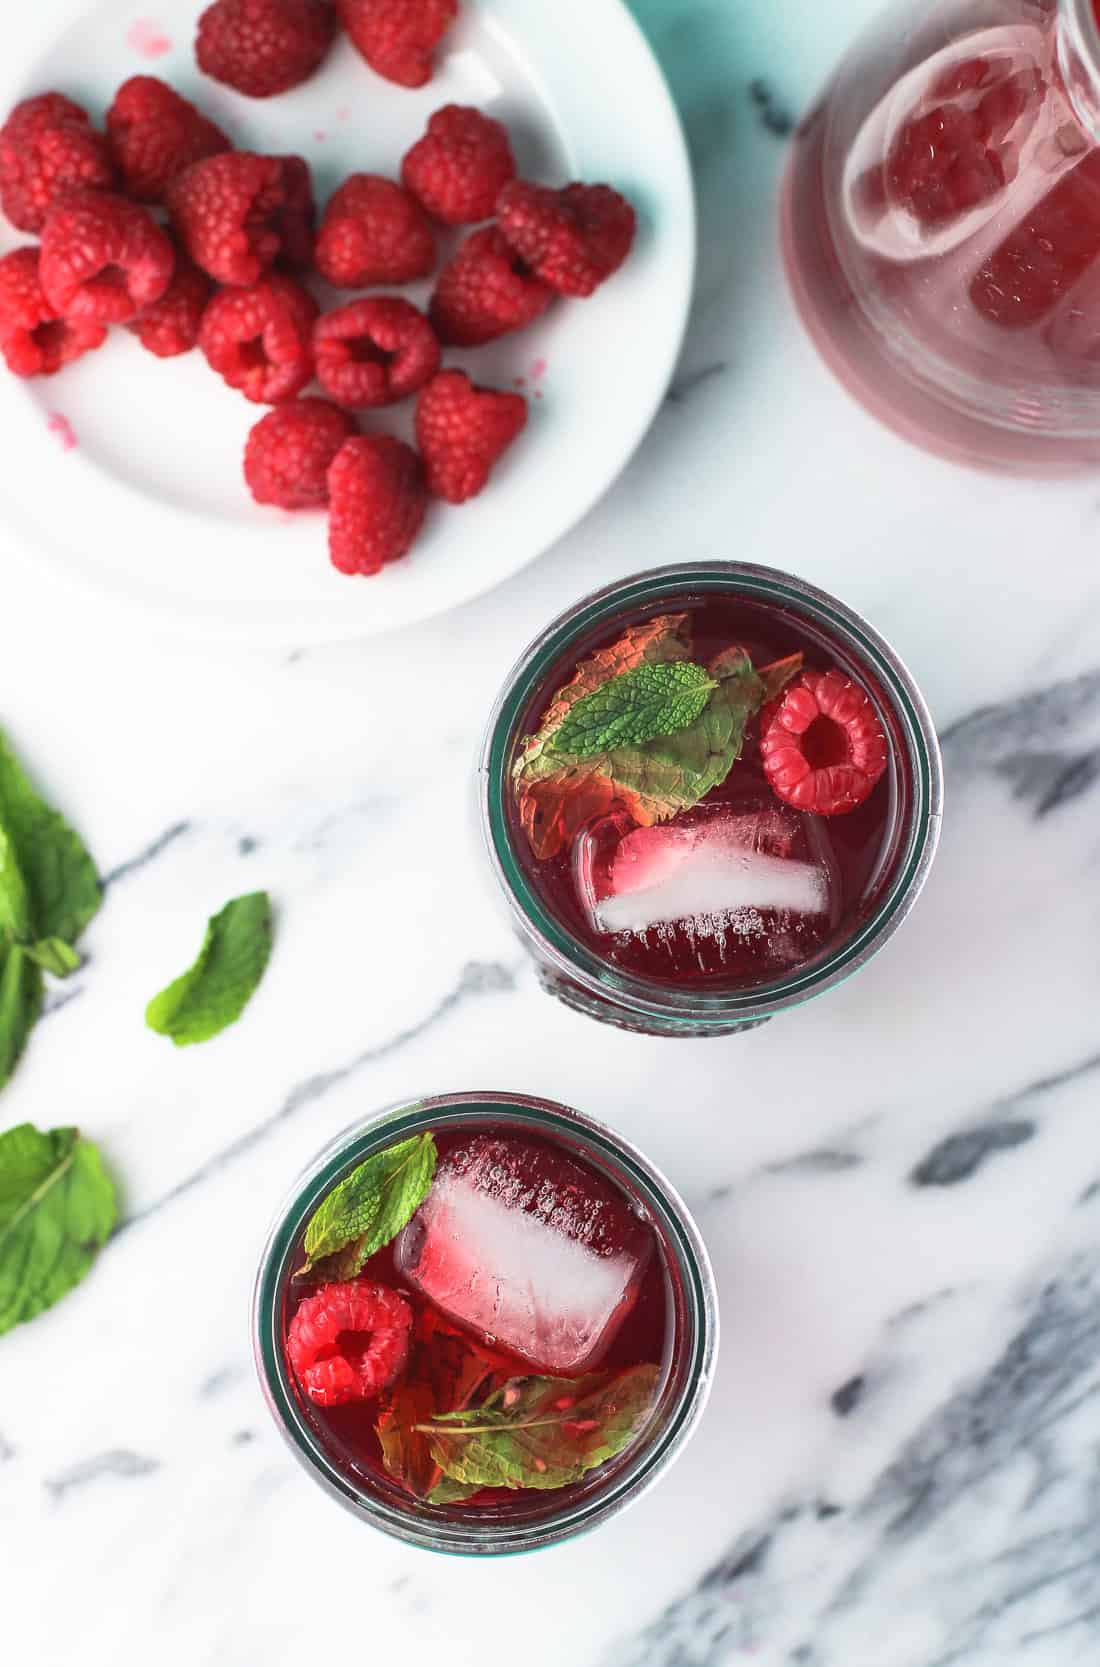 An overhead shot of two glasses of iced tea, raspberries, mint leaves, and a mostly-empty glass carafe of iced tea